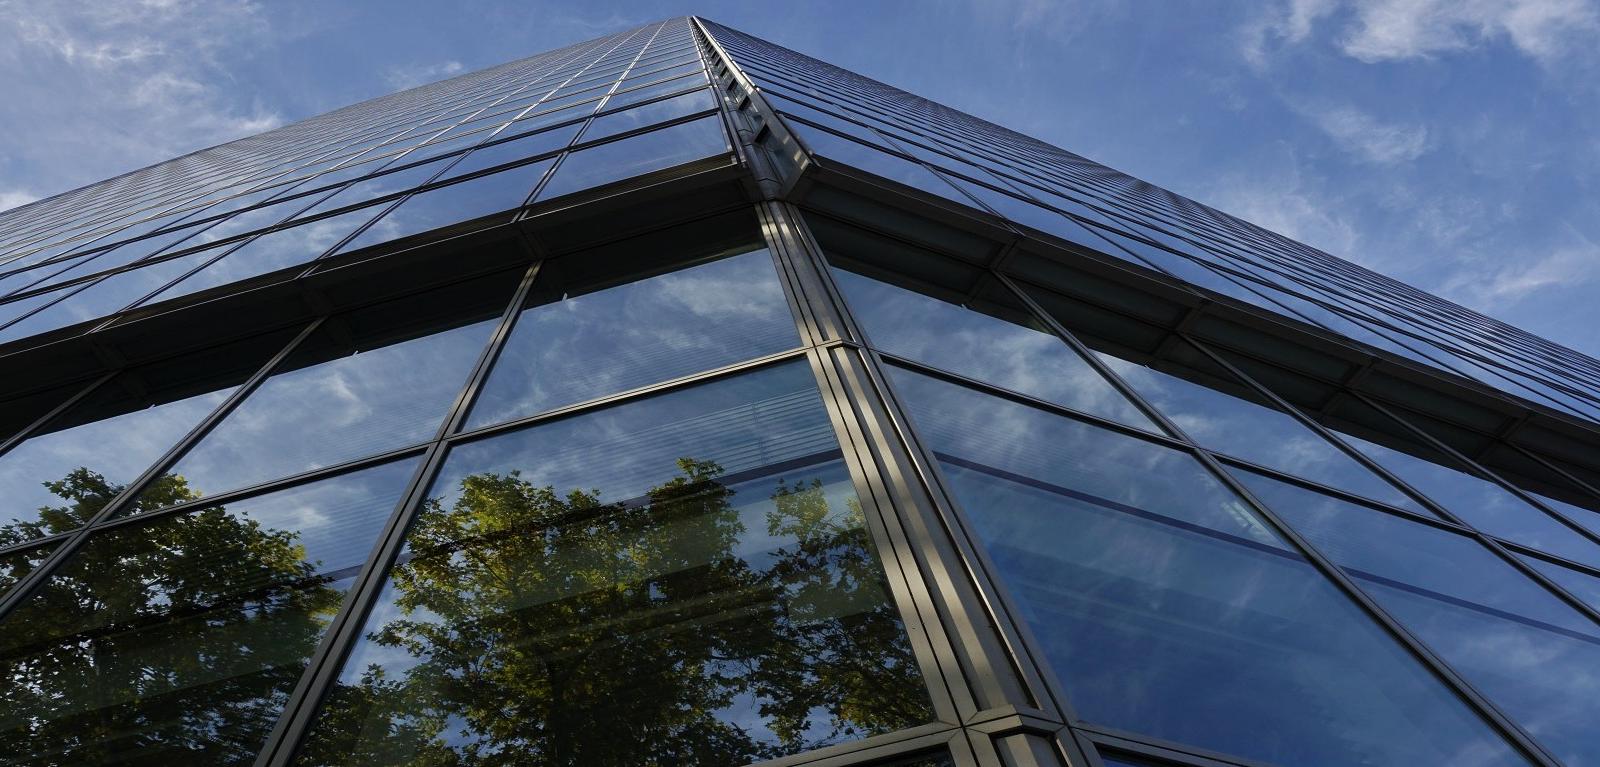 KnowESG_New Low-Carbon Glass Reduces Embodied Carbon by 50%